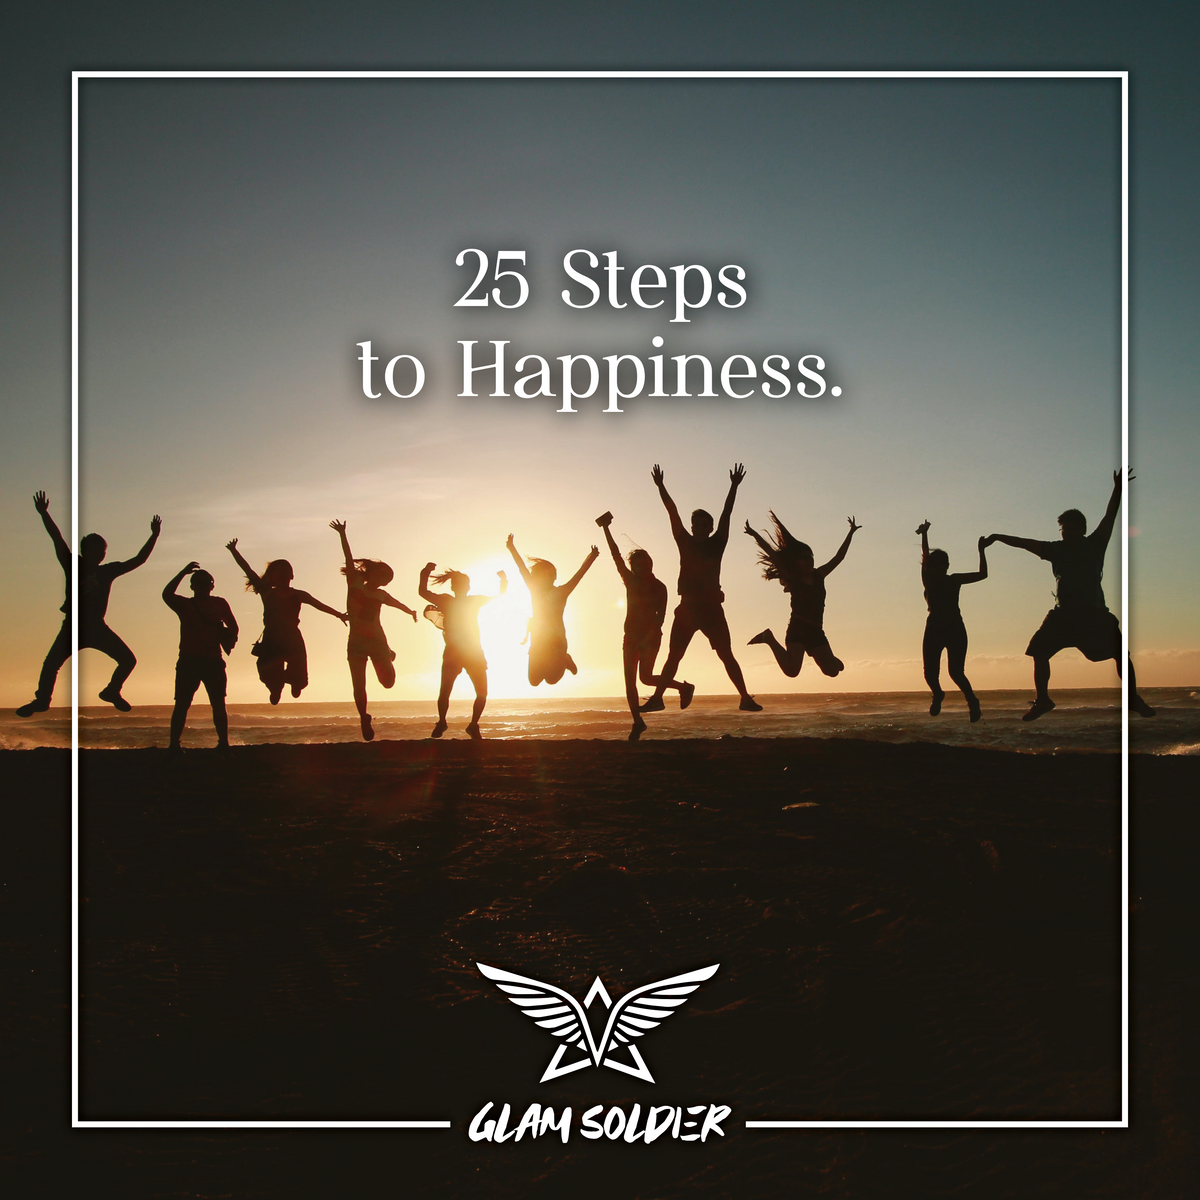 Discover Happiness in 25 Steps!